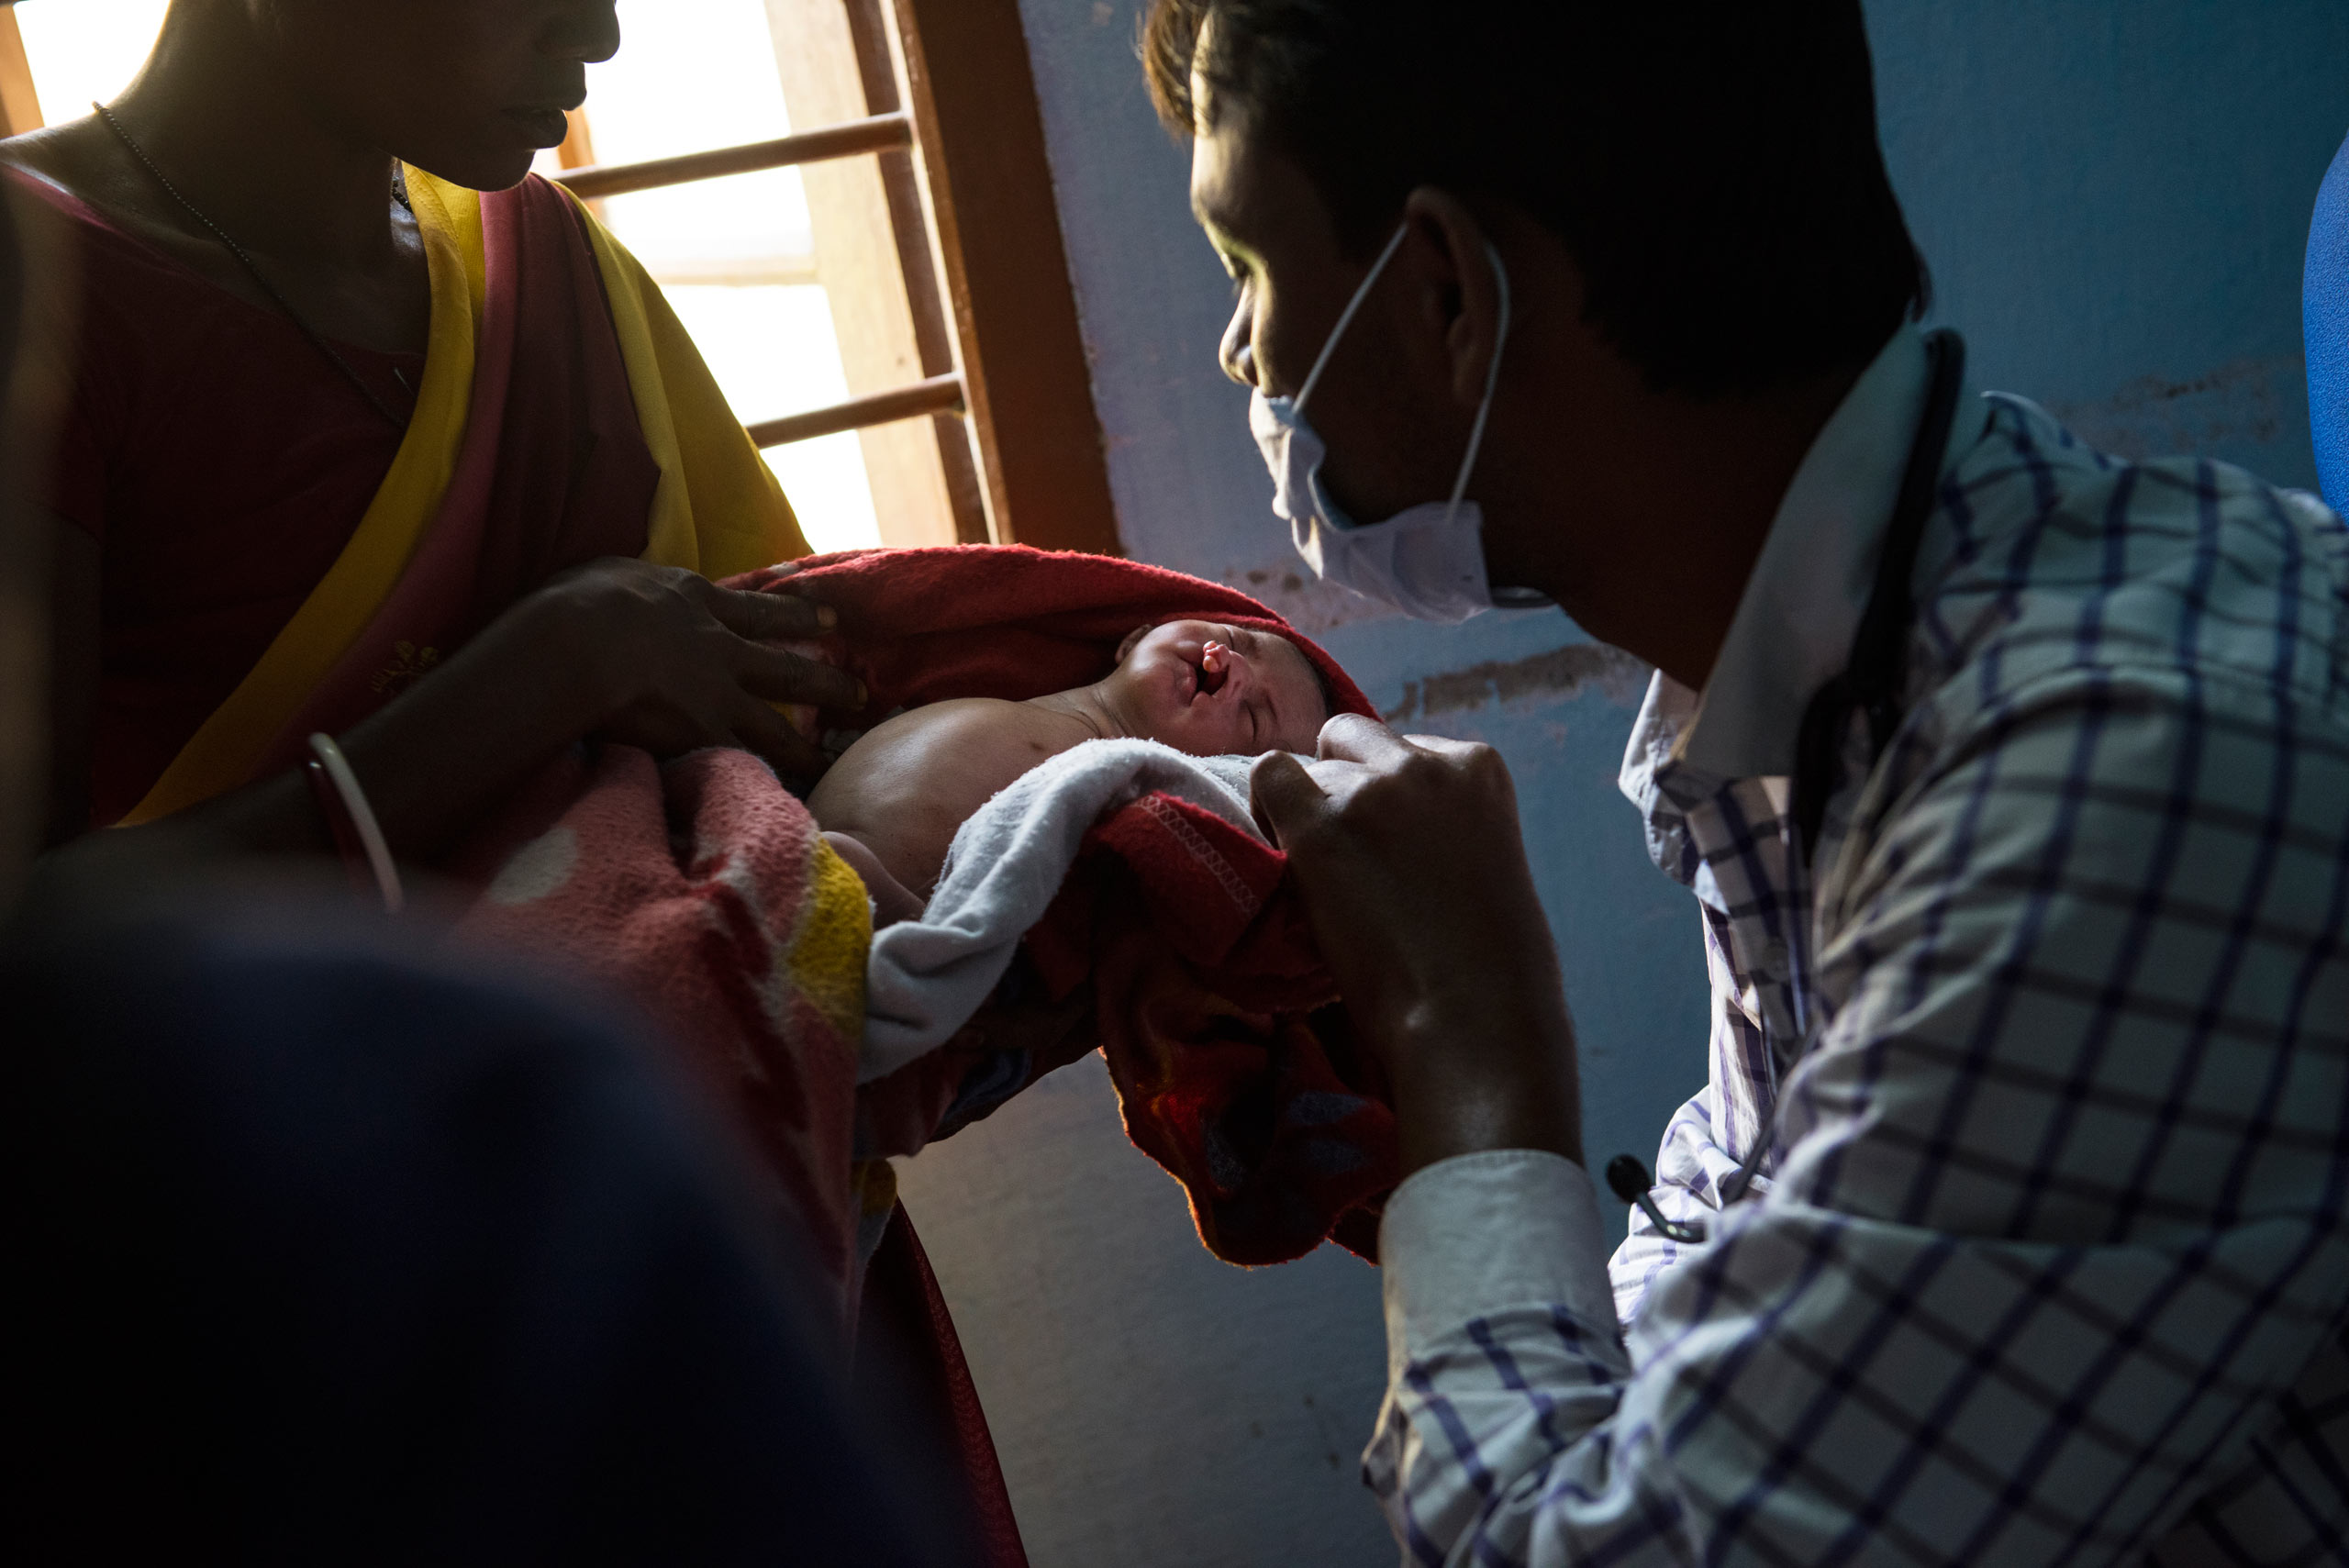 Sosana Gowala holds up her severely deformed nephew for the doctor to see, in the Dhekiajuli Community Health Center, hours after her niece, Resonate Bhumi gave birth to a baby with no arms and a cleft palate in the village of Holing Kata, in the Tinkharia plantation, Assam, India. April 8, 2015.